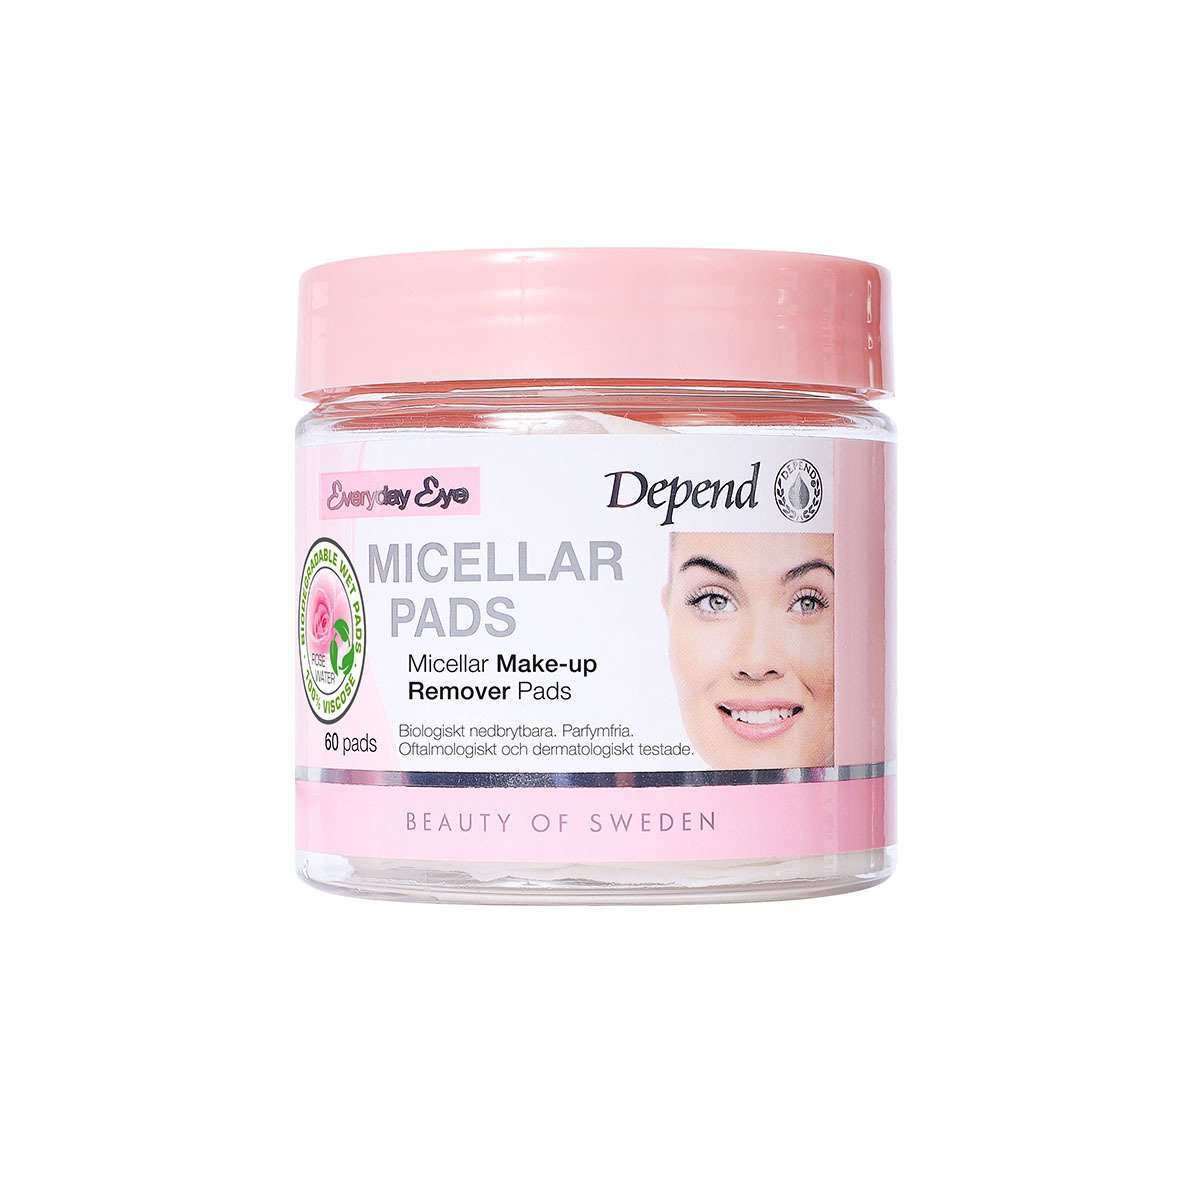 Depend Everyday Eye Micellar Make-Up Remover Pads 60 st